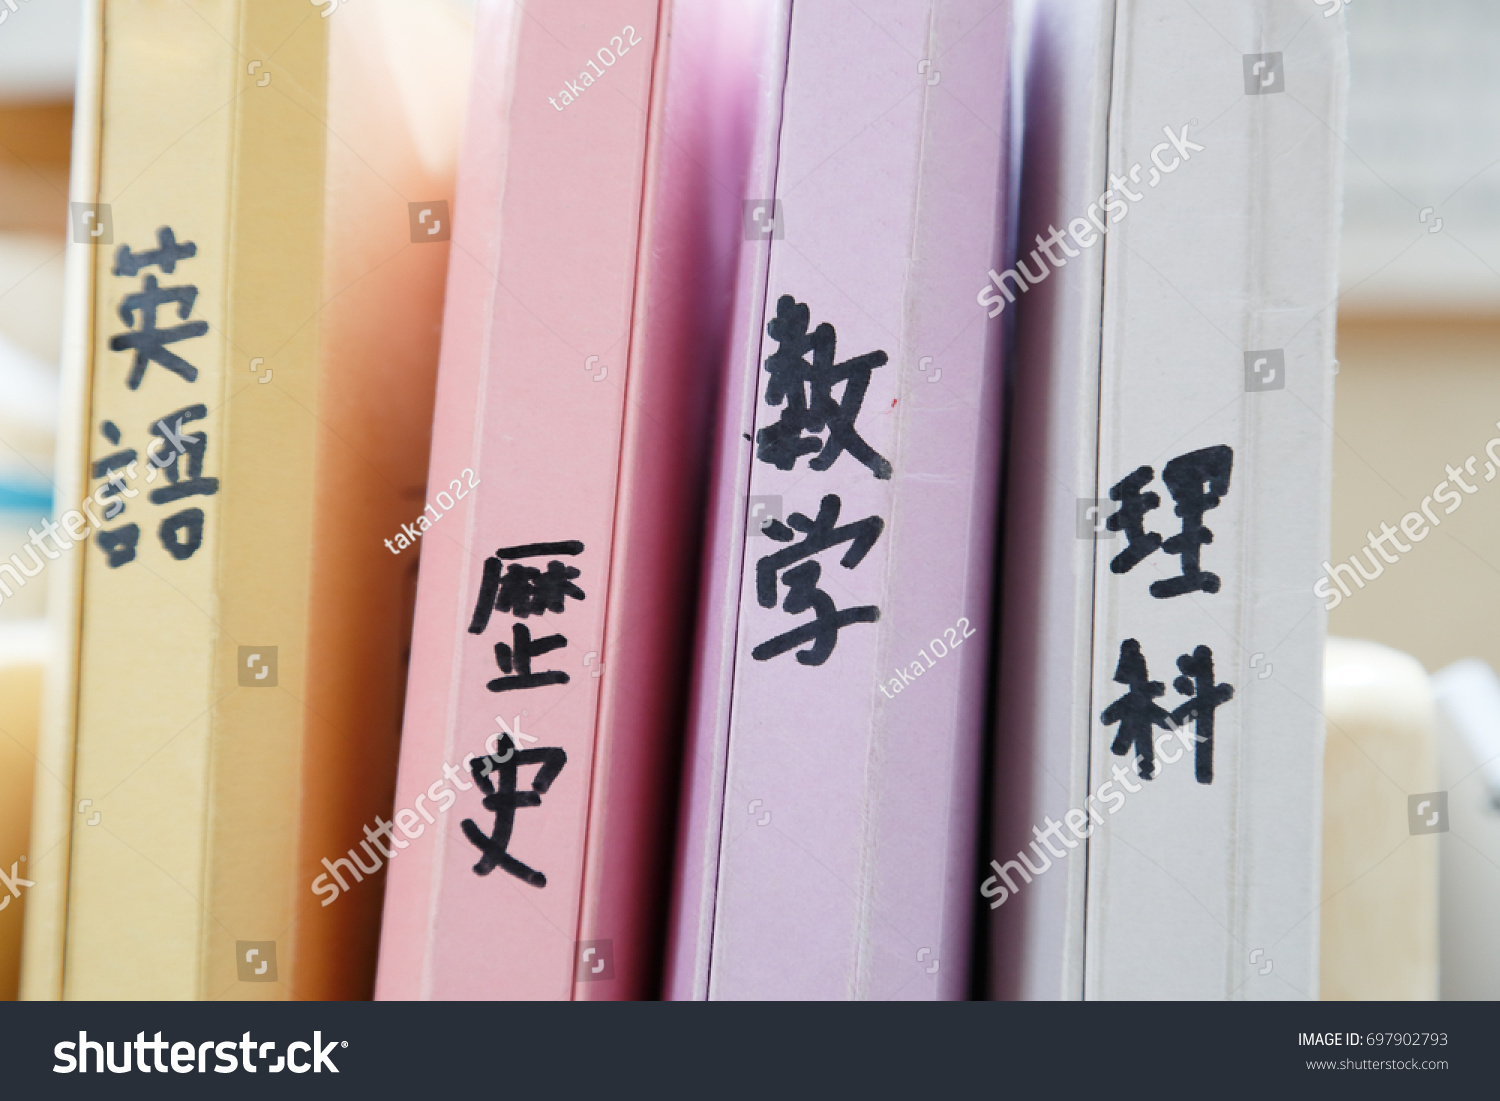 Learning binder for junior high school students/Japanese of the back cover is written as English, history, mathematics, science, geography, national language #697902793